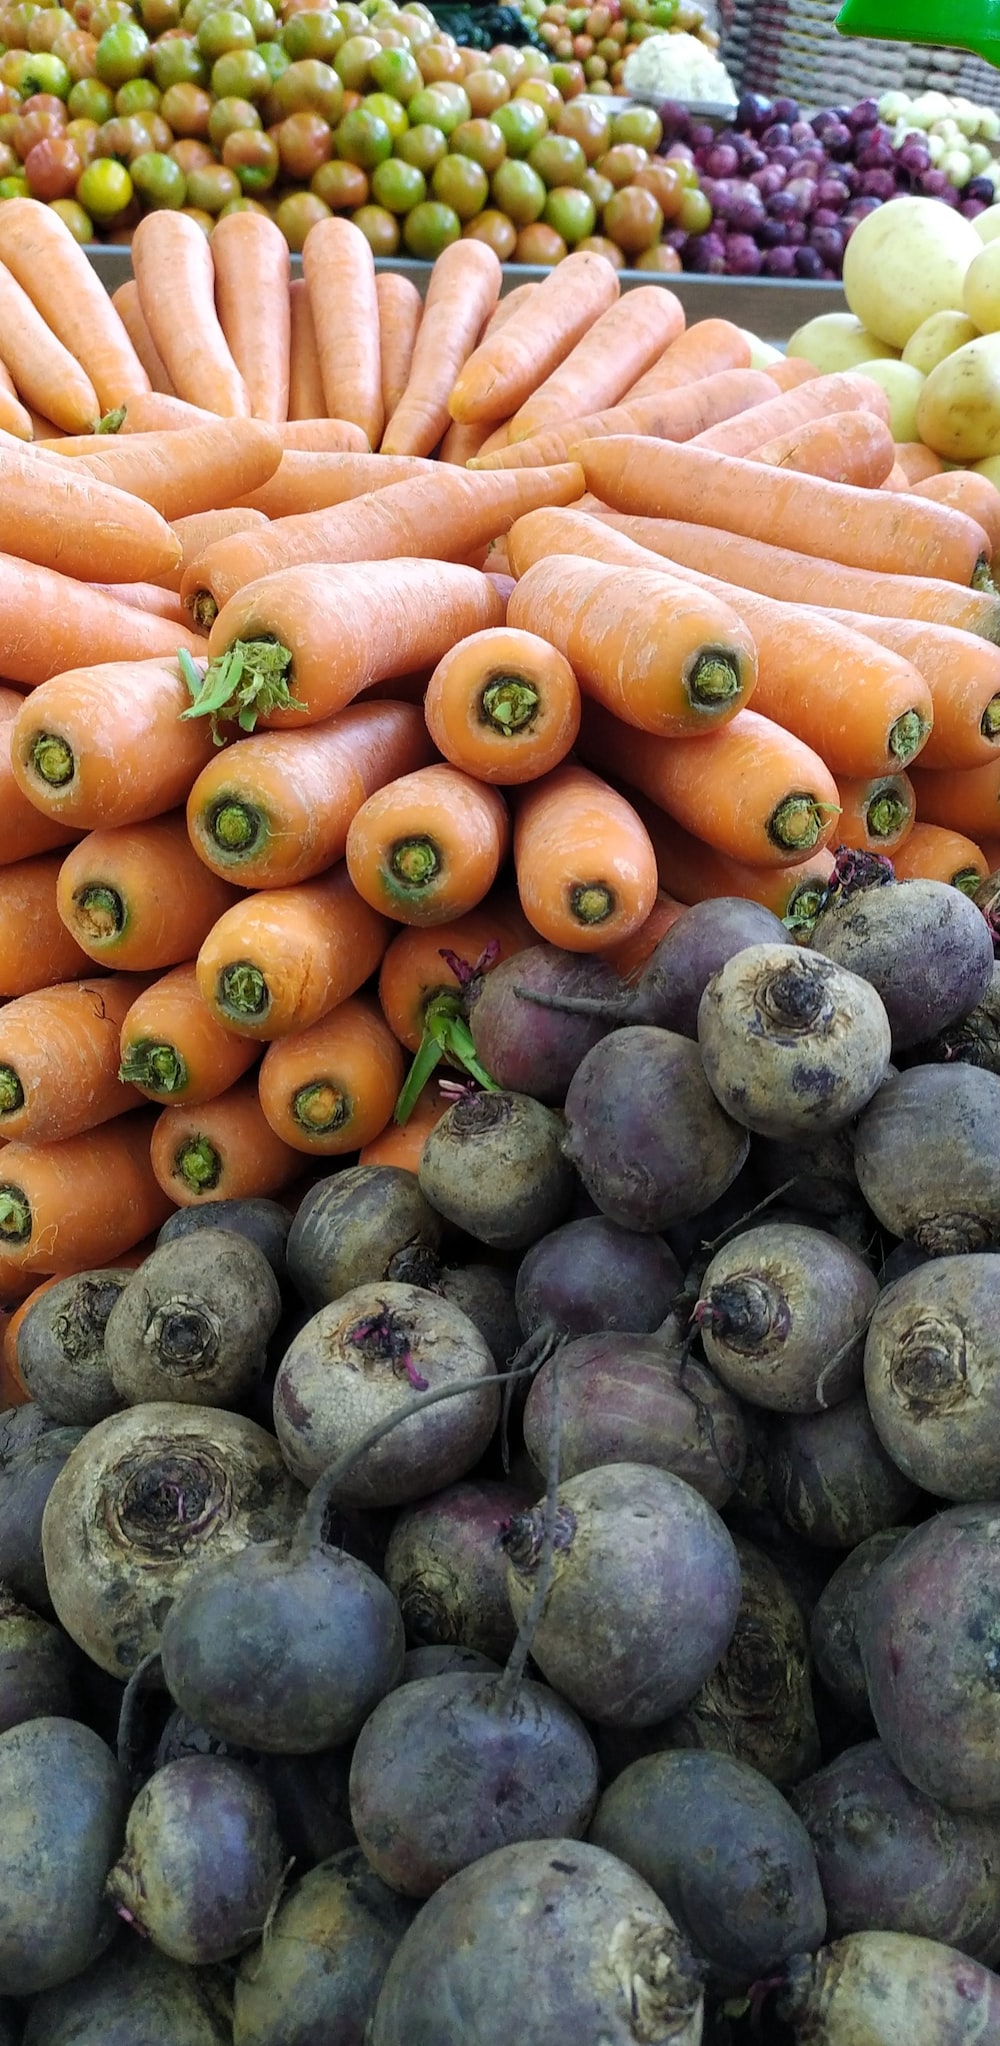 a pile of carrots sitting next to other fruits and vegetables